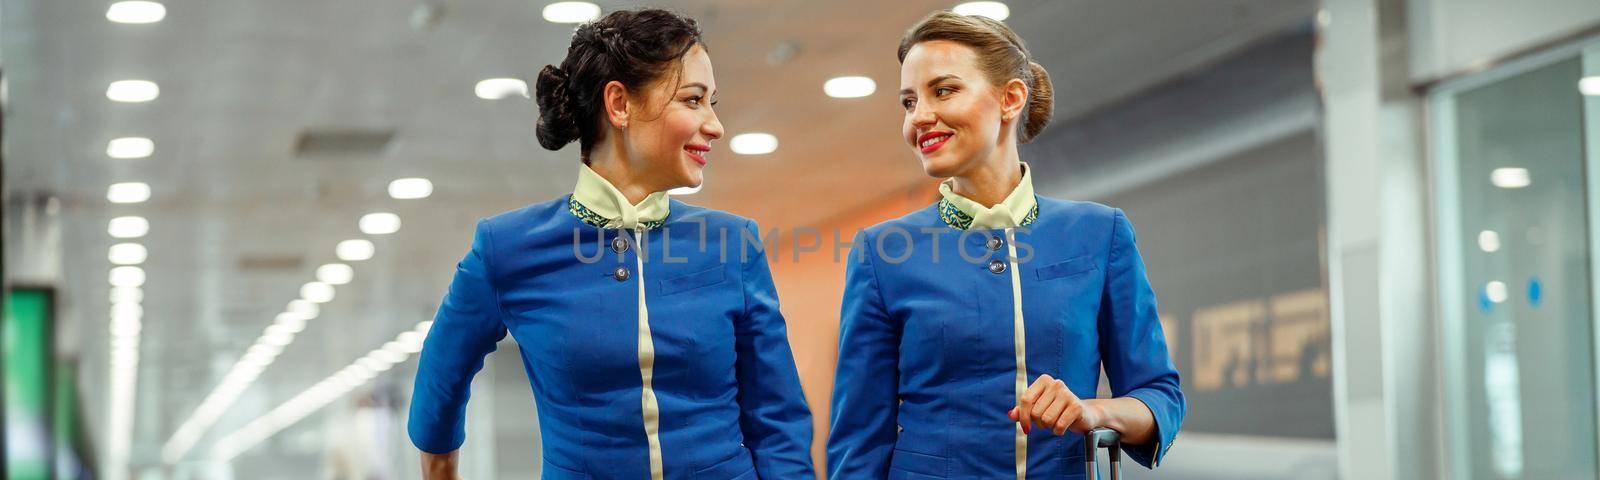 Joyful female flight attendants in air hostess uniform looking at each other and smiling while waiting for airplane